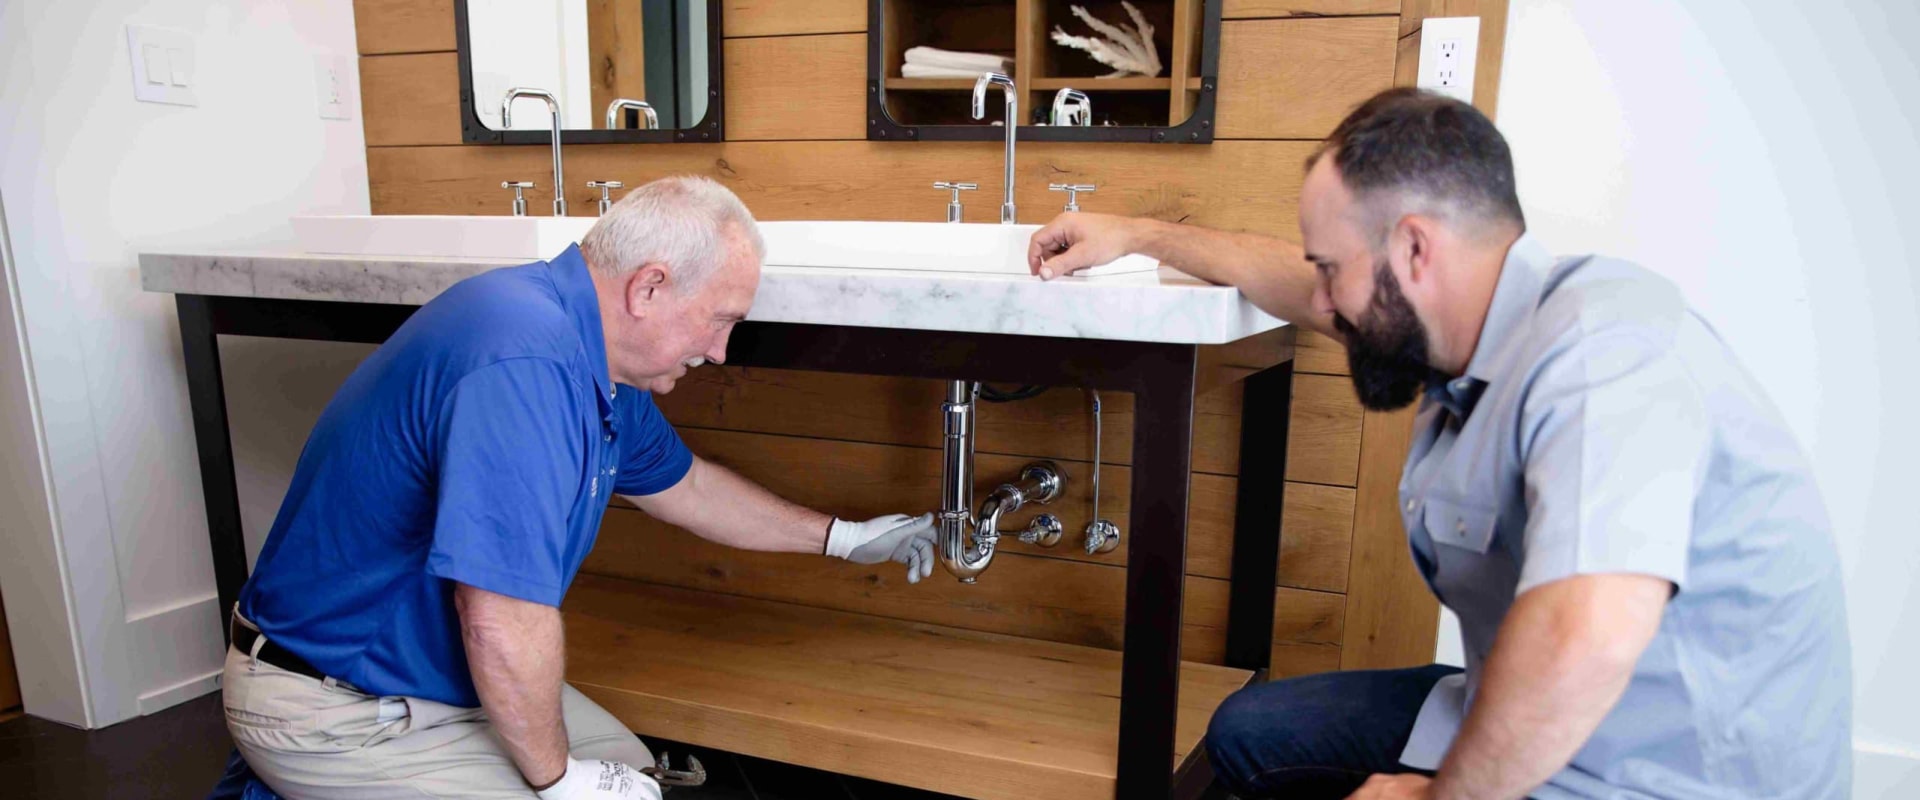 What You Need to Know About Plumbing Inspections